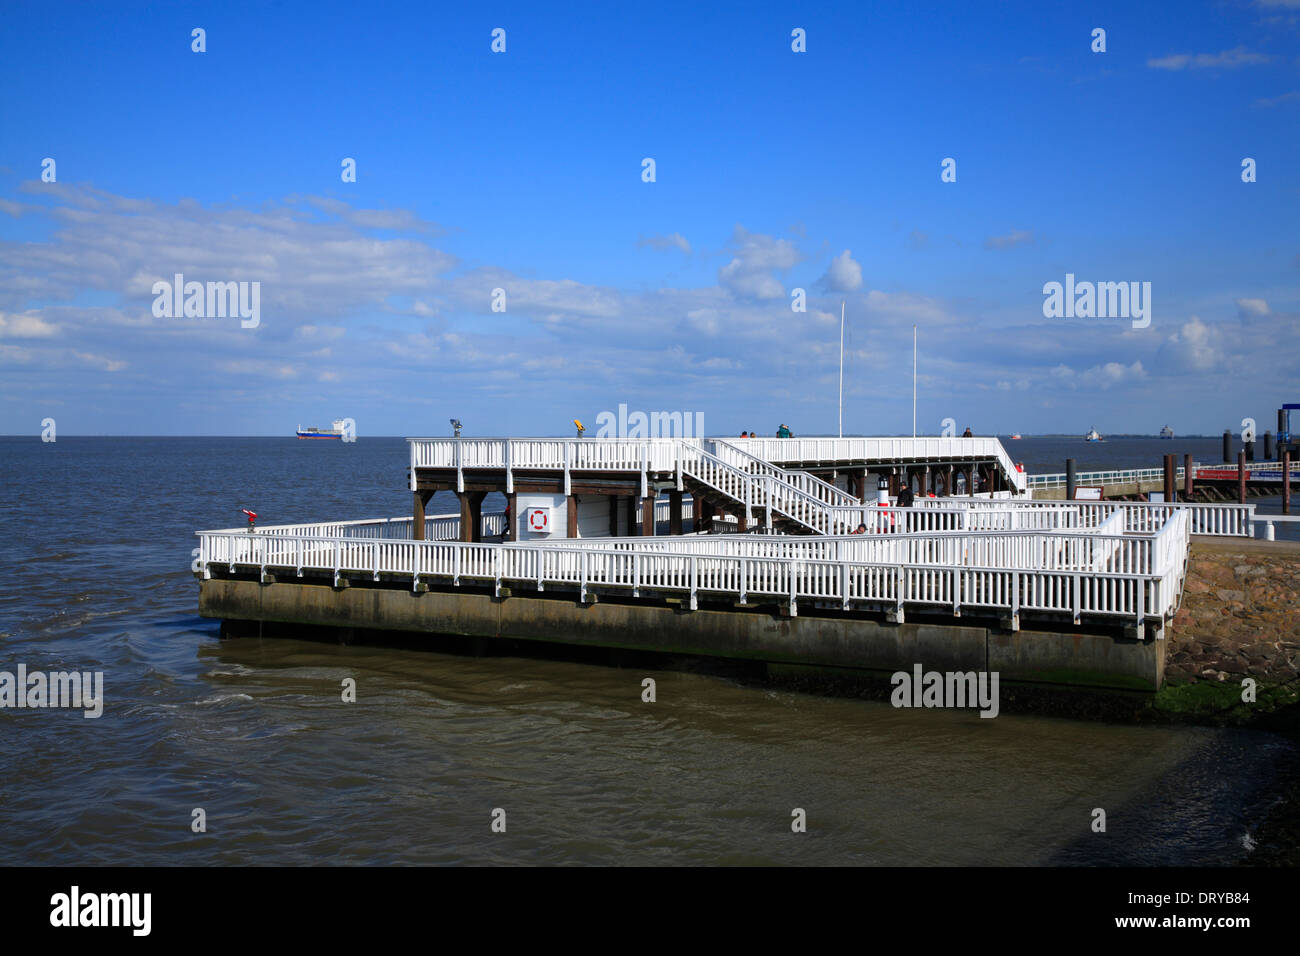 Pier ALTE LIEBE,  Cuxhaven, North Sea, Lower Saxony, Germany, Europe Stock Photo